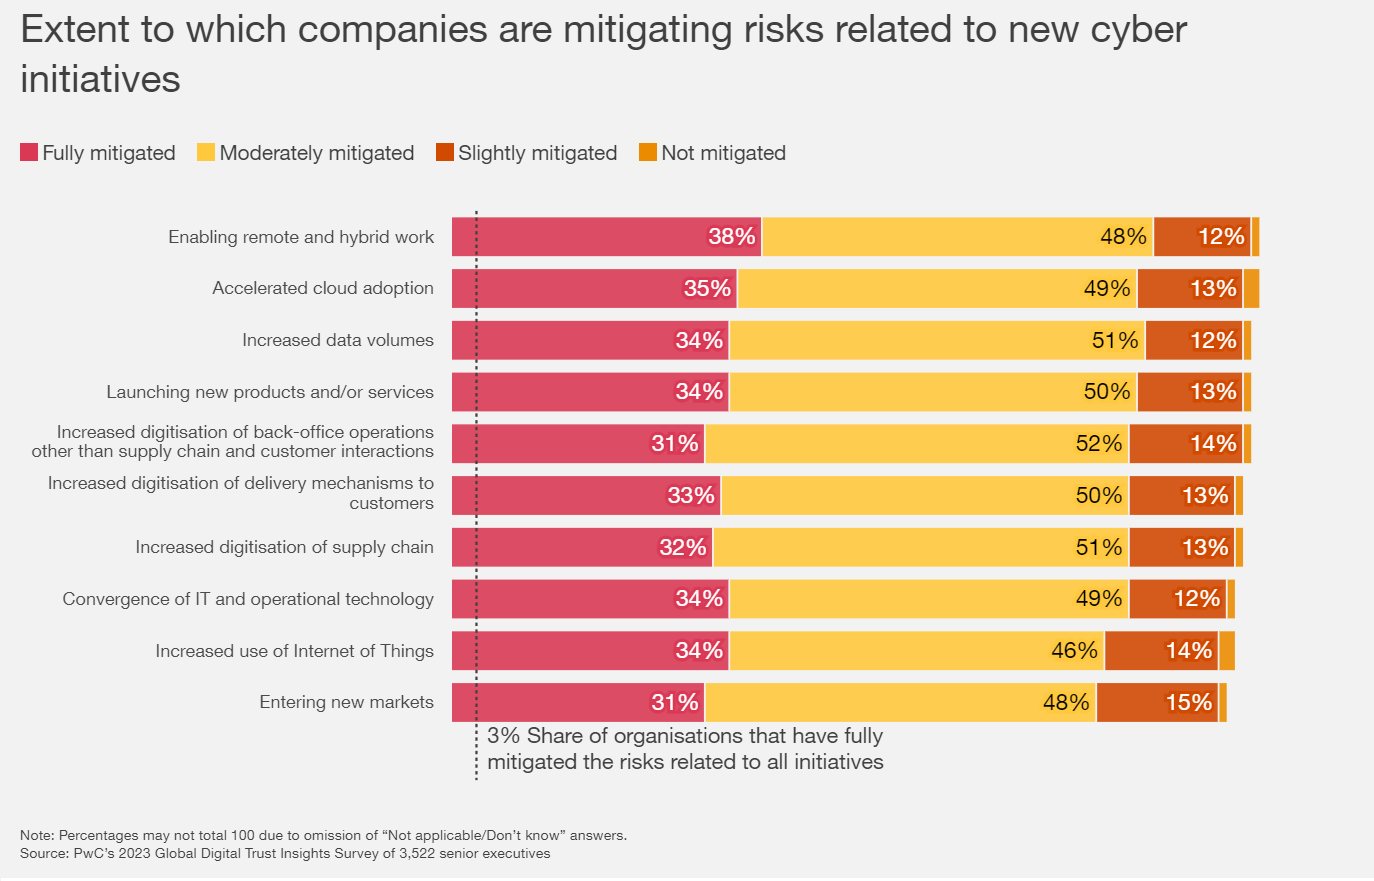 PwC 2023 Global Digital Trust Insights Survey on mitigating risks related to new cyber initiatives via PwC